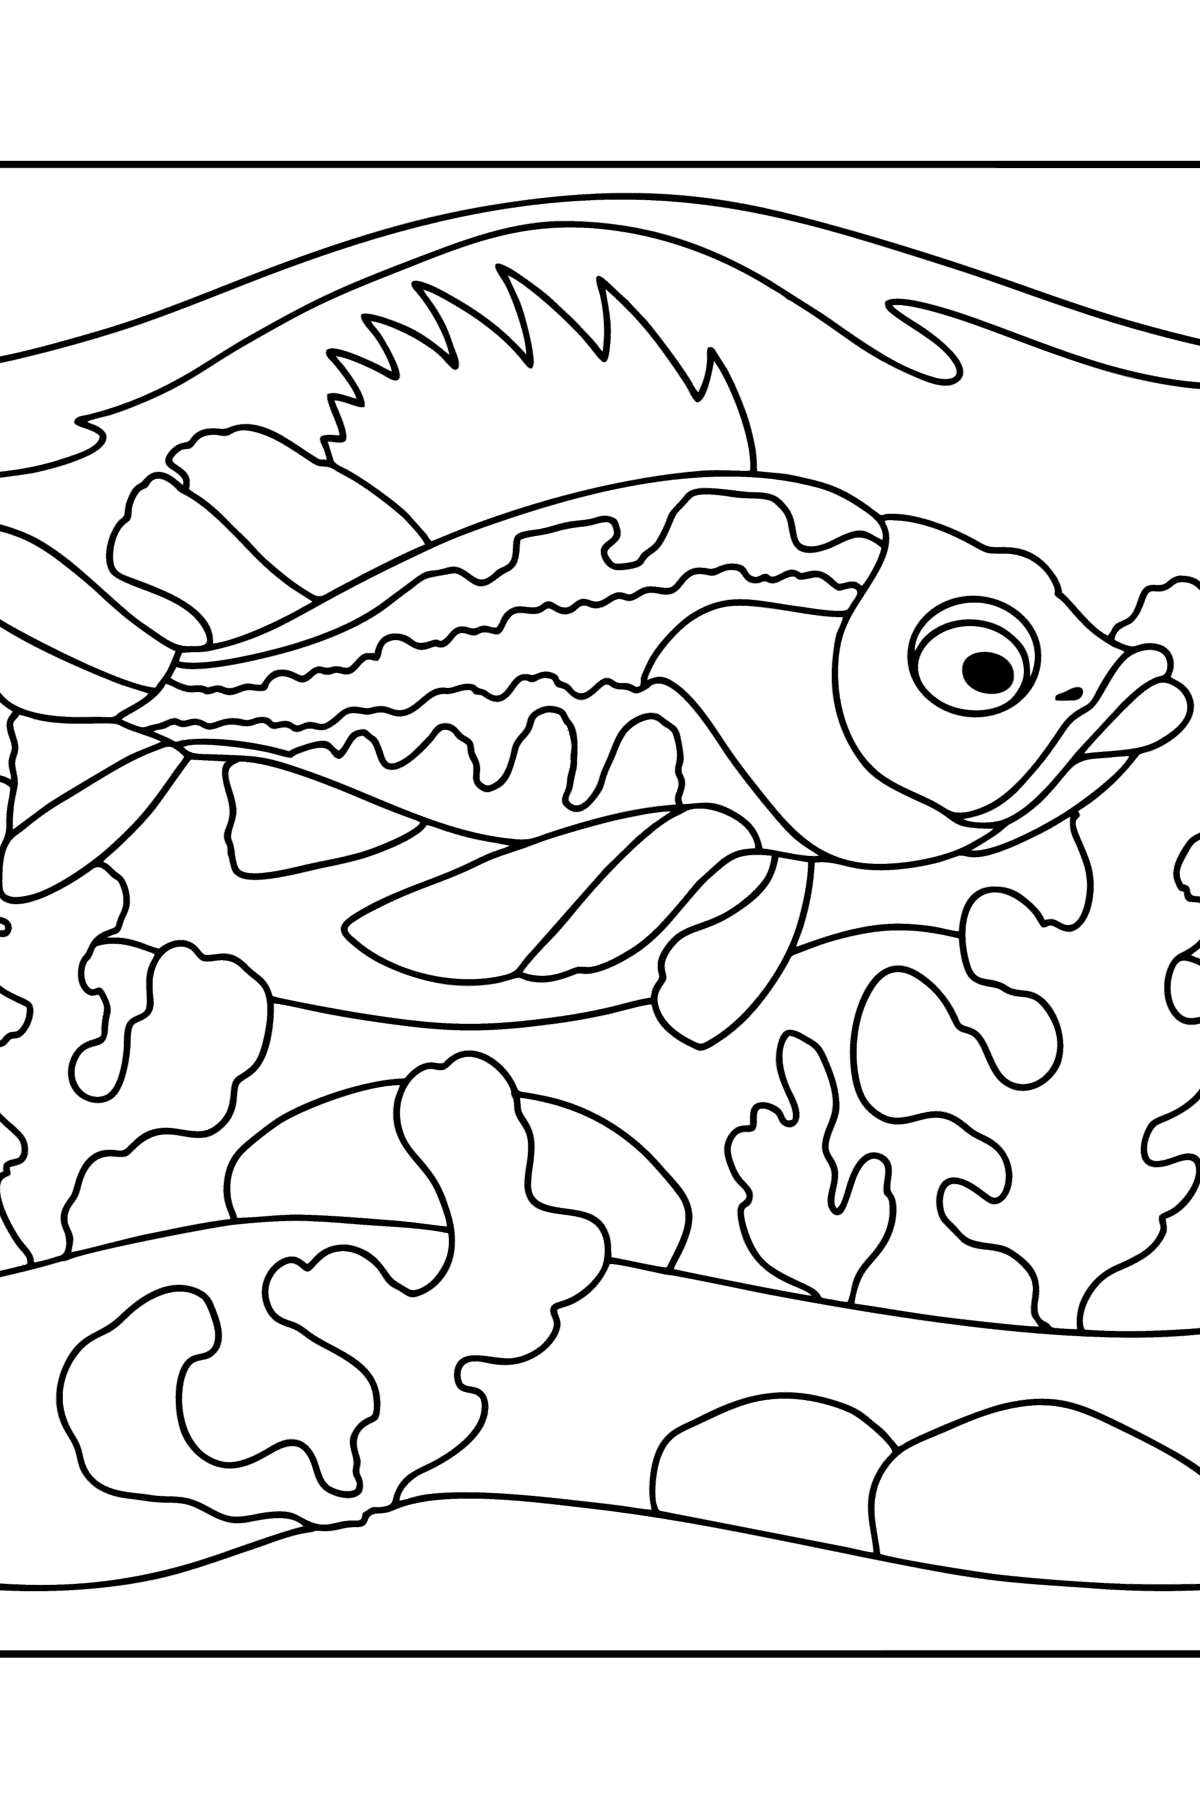 Sea bass coloring page - Coloring Pages for Kids